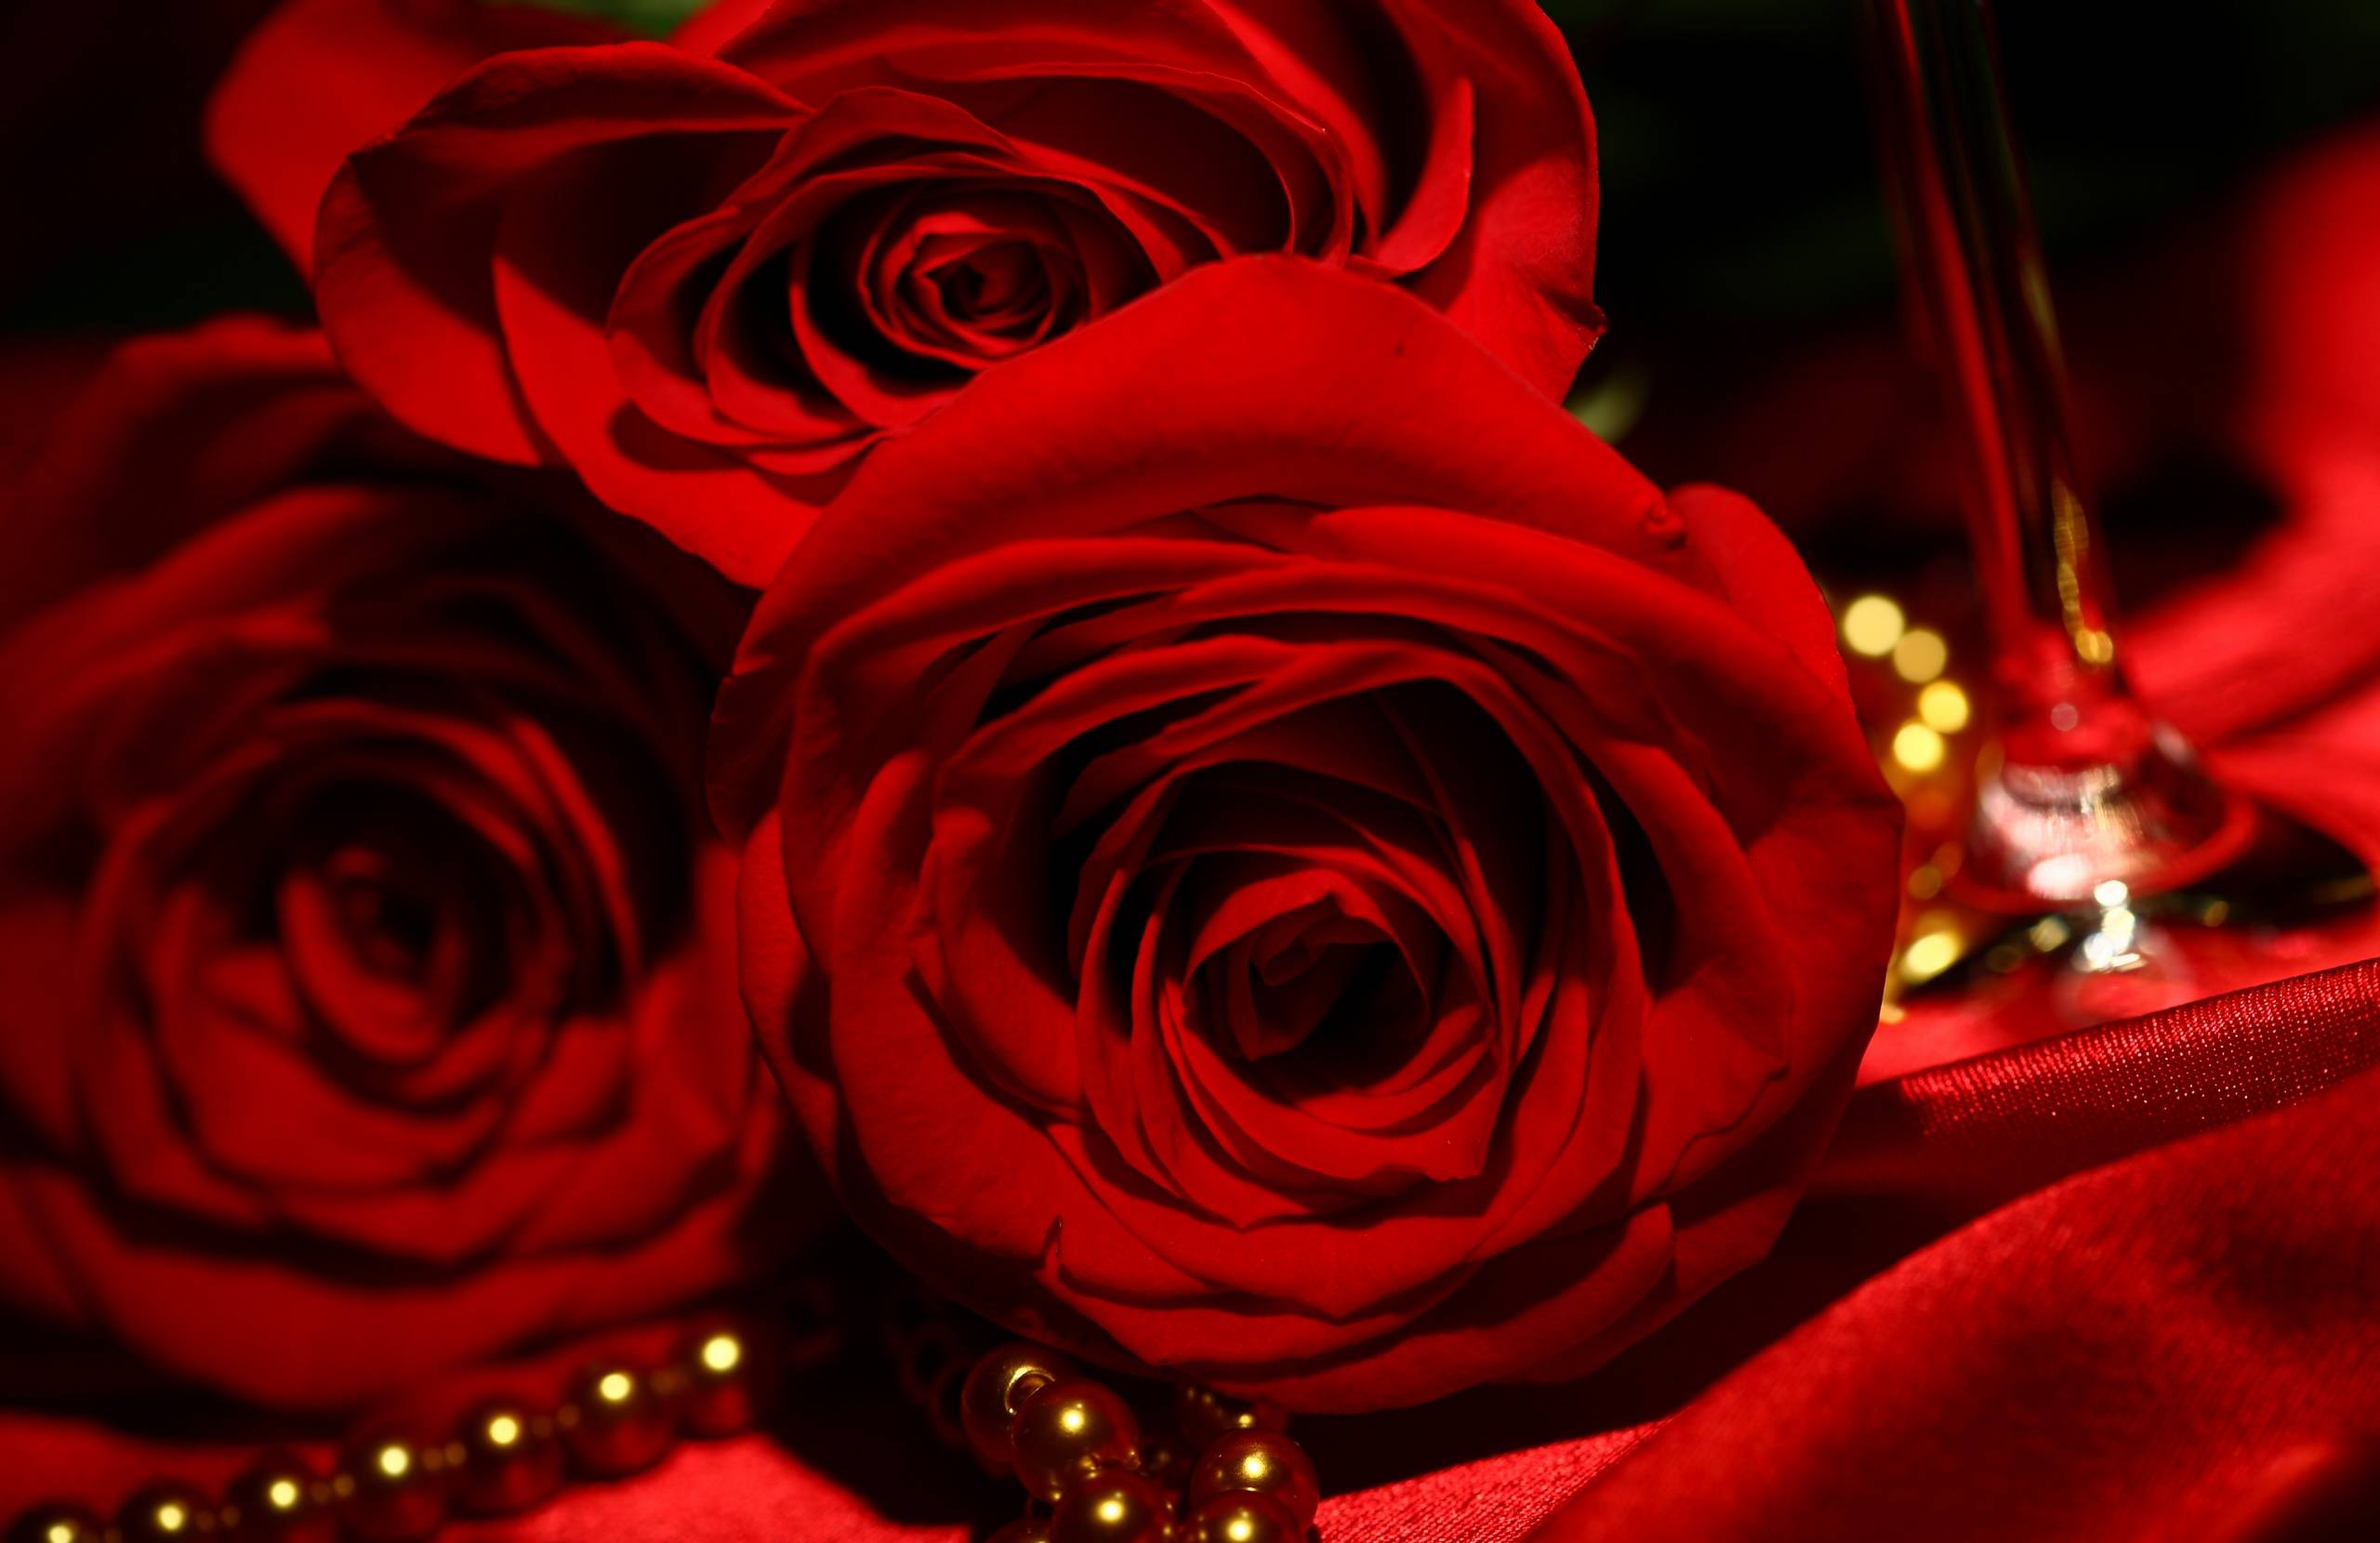 Red Rose Wallpapers HD - Wallpaper Cave